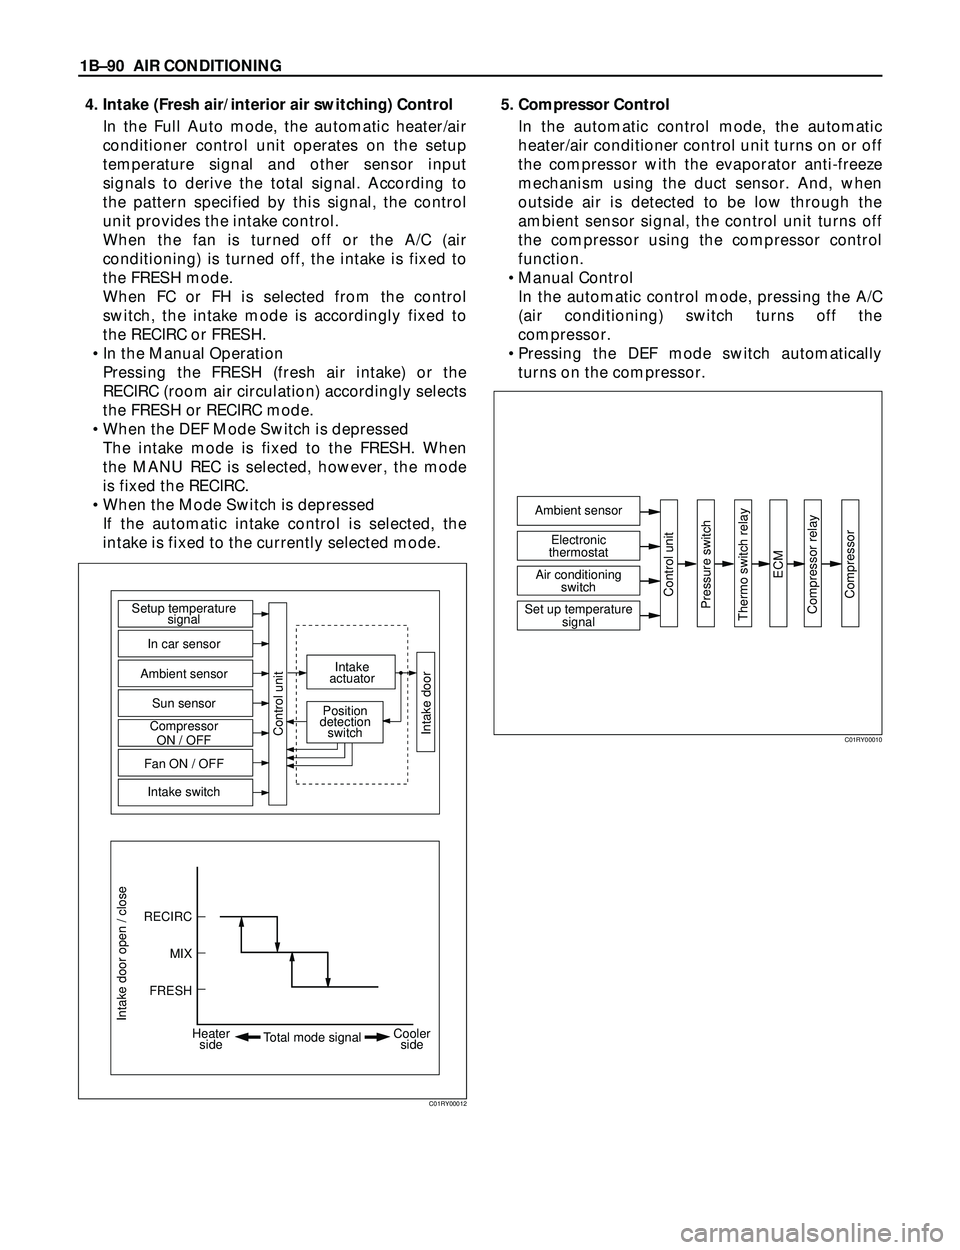 ISUZU TROOPER 1998  Service Repair Manual 1BÐ90 AIR CONDITIONING
4. Intake (Fresh air/interior air switching) Control
In the Full Auto mode, the automatic heater/air
conditioner control unit operates on the setup
temperature signal and other